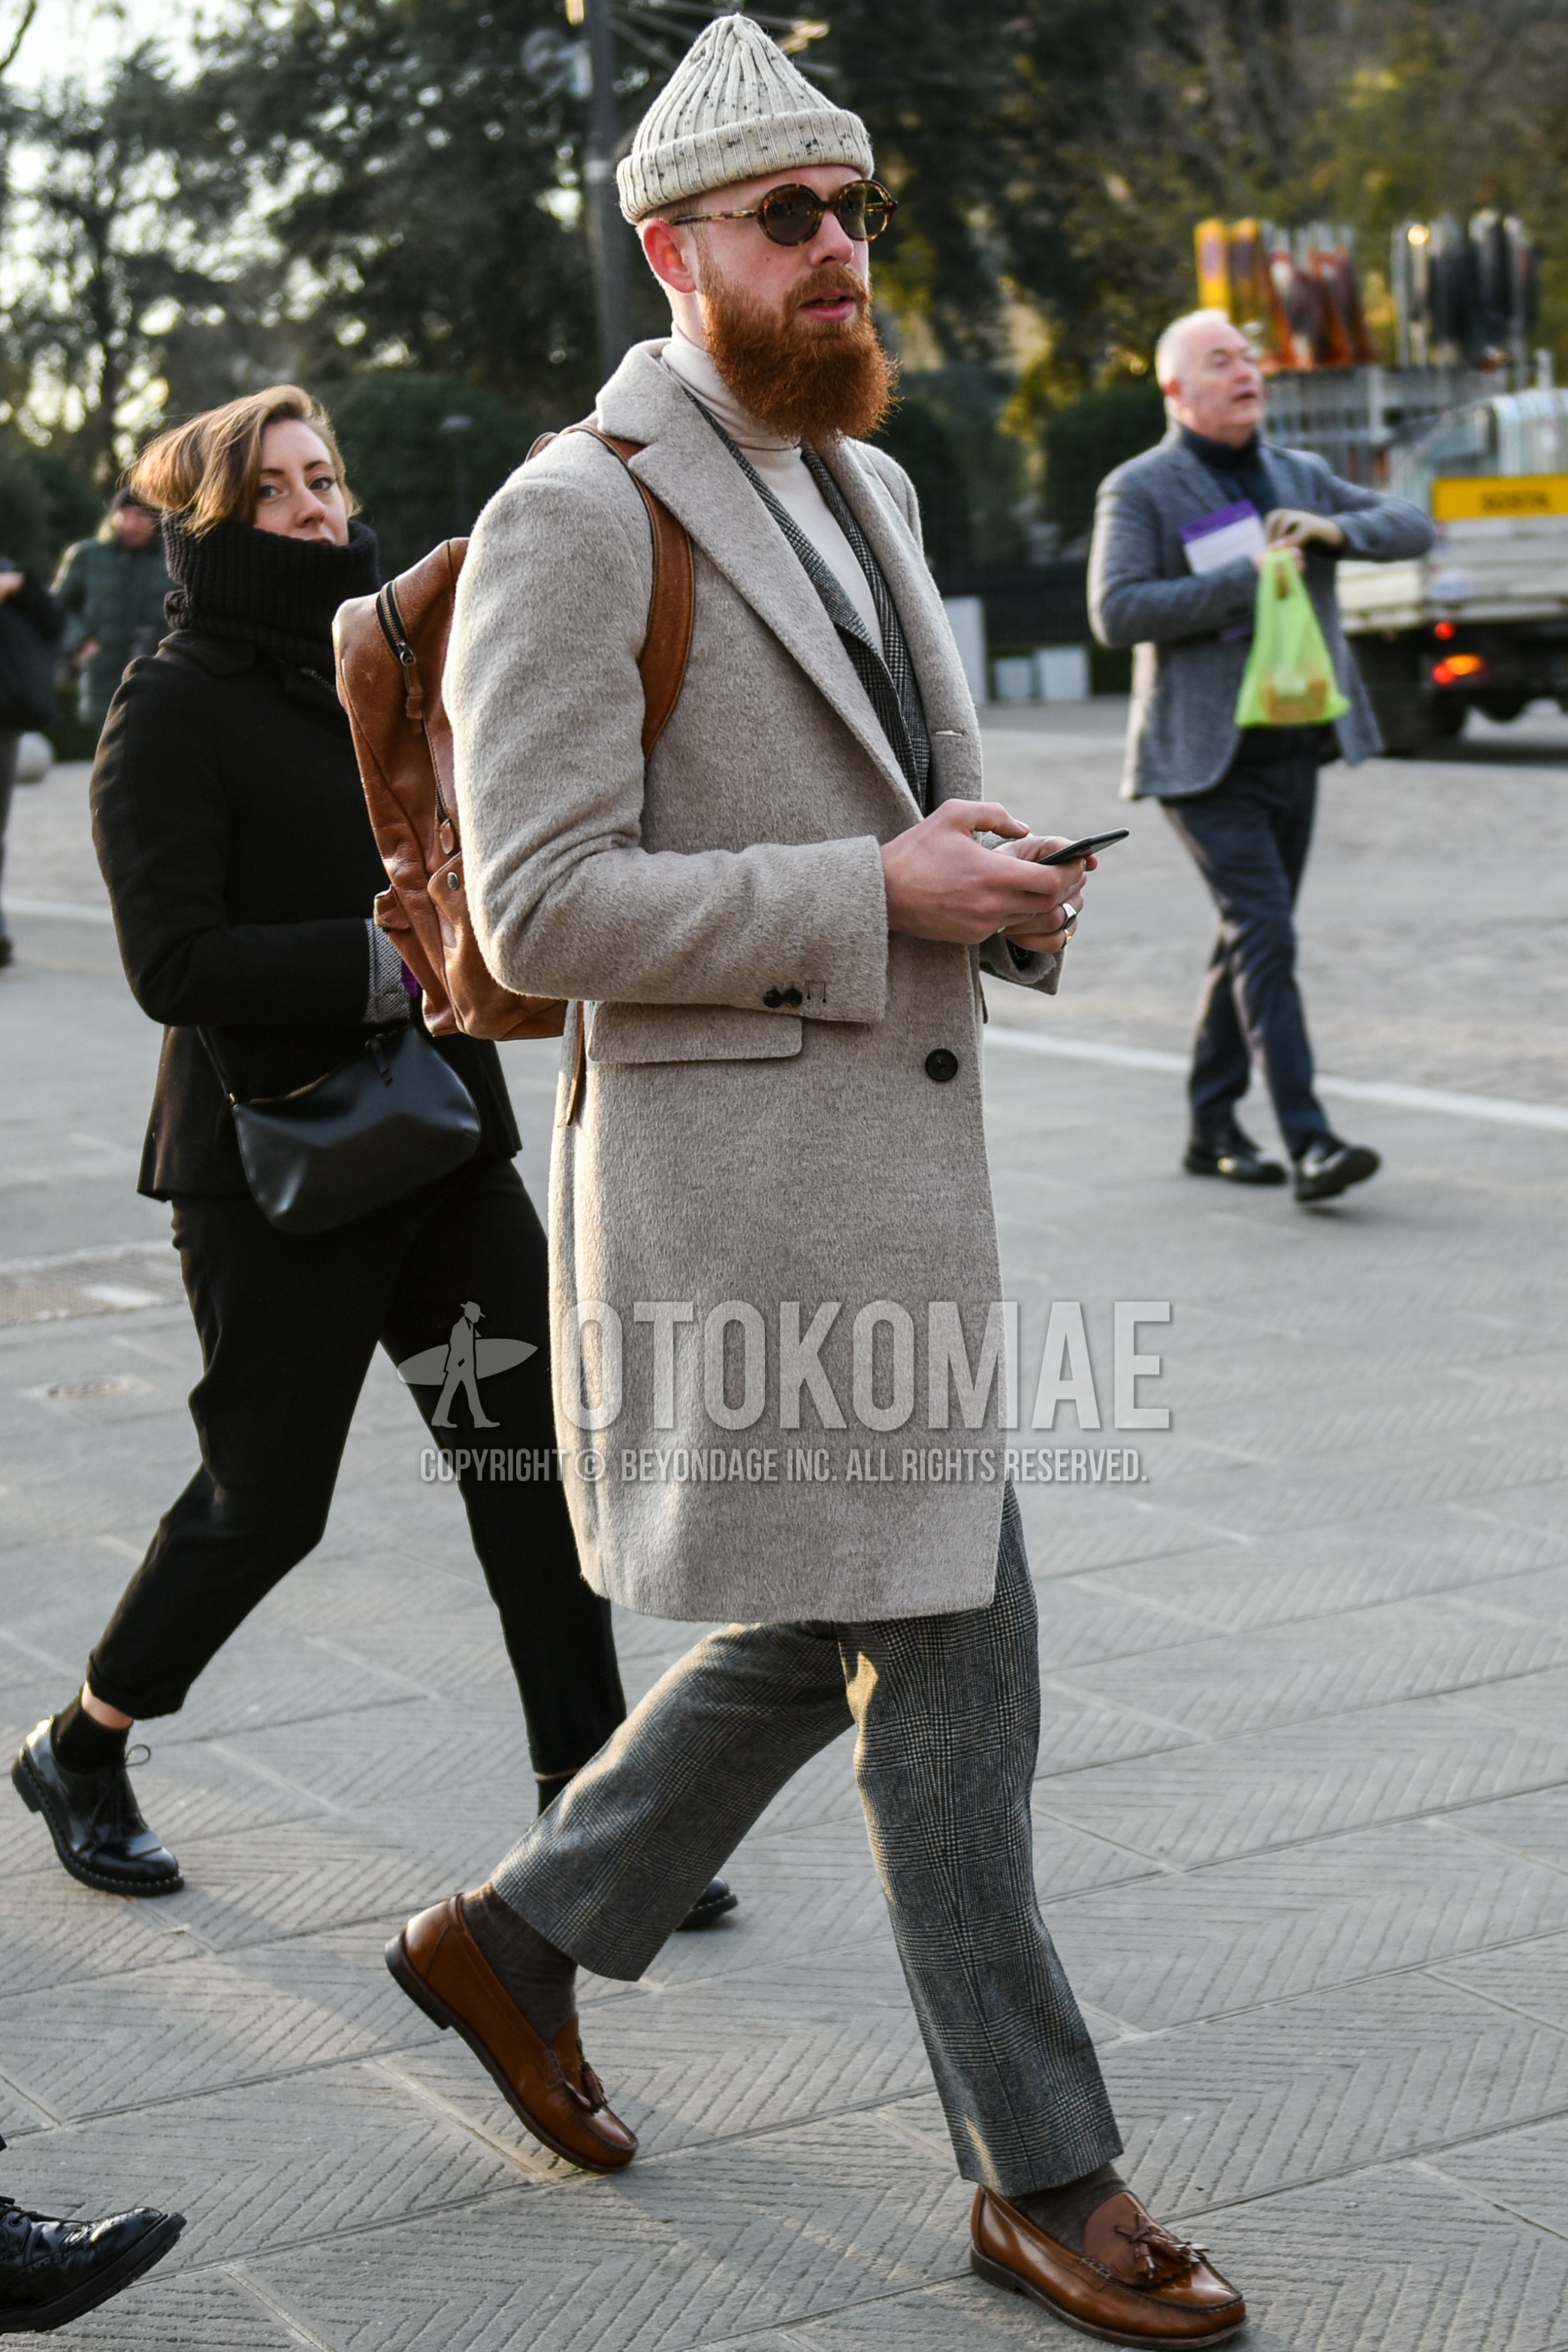 Men's autumn winter outfit with white plain knit cap, brown tortoiseshell sunglasses, gray plain chester coat, white plain turtleneck knit, gray plain socks, brown tassel loafers leather shoes, brown plain backpack, gray check suit.